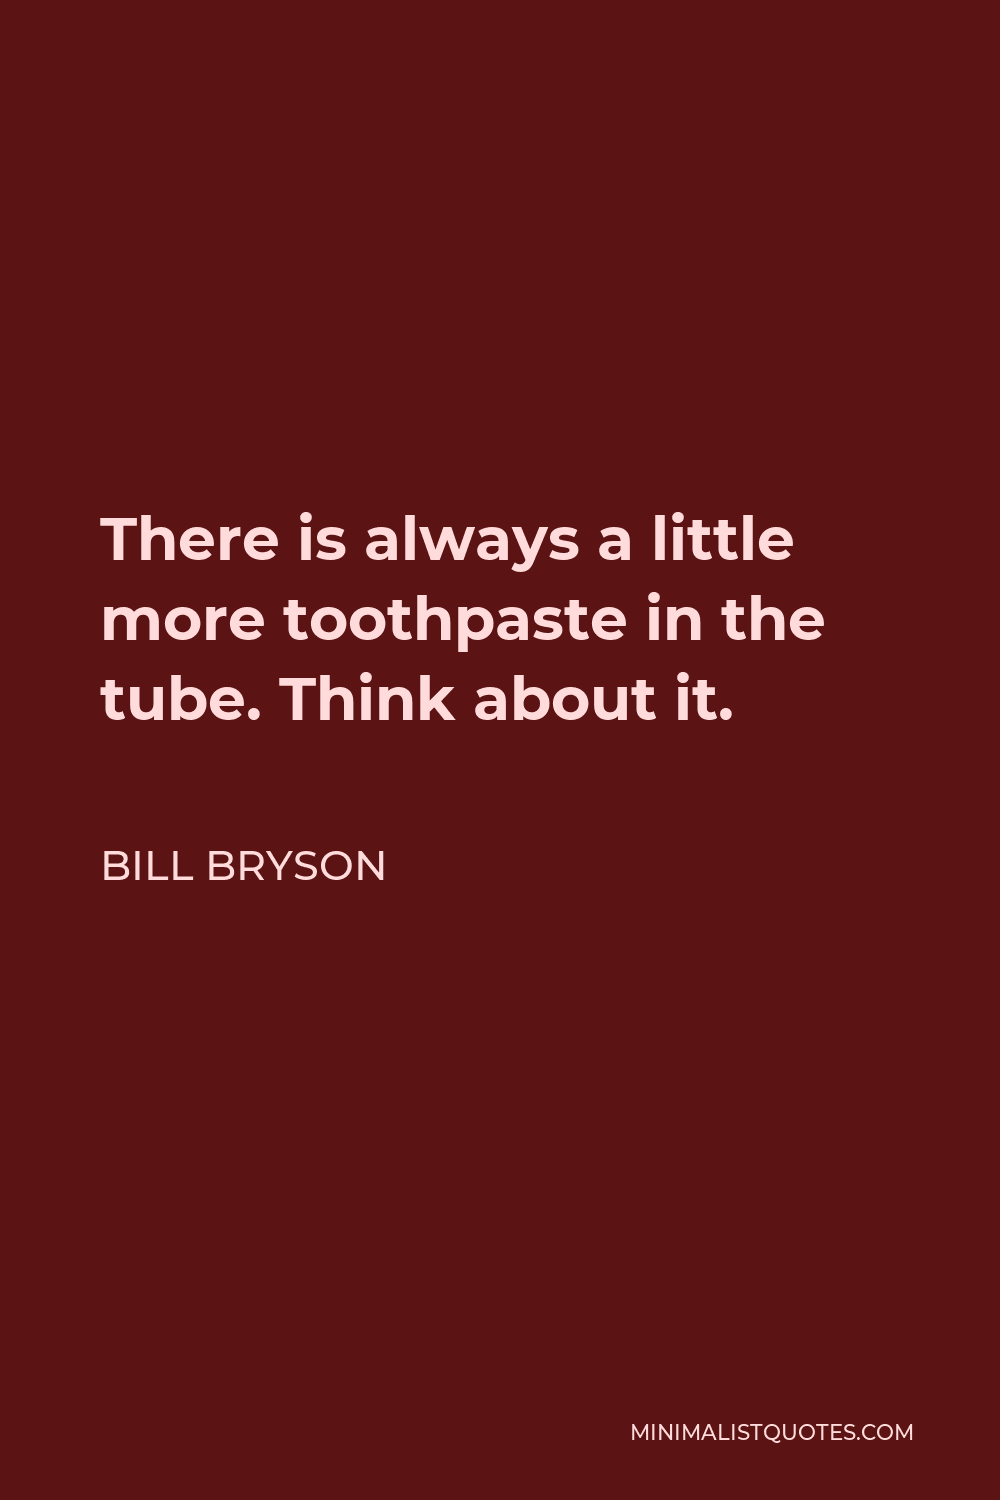 Bill Bryson Quote - There is always a little more toothpaste in the tube. Think about it.